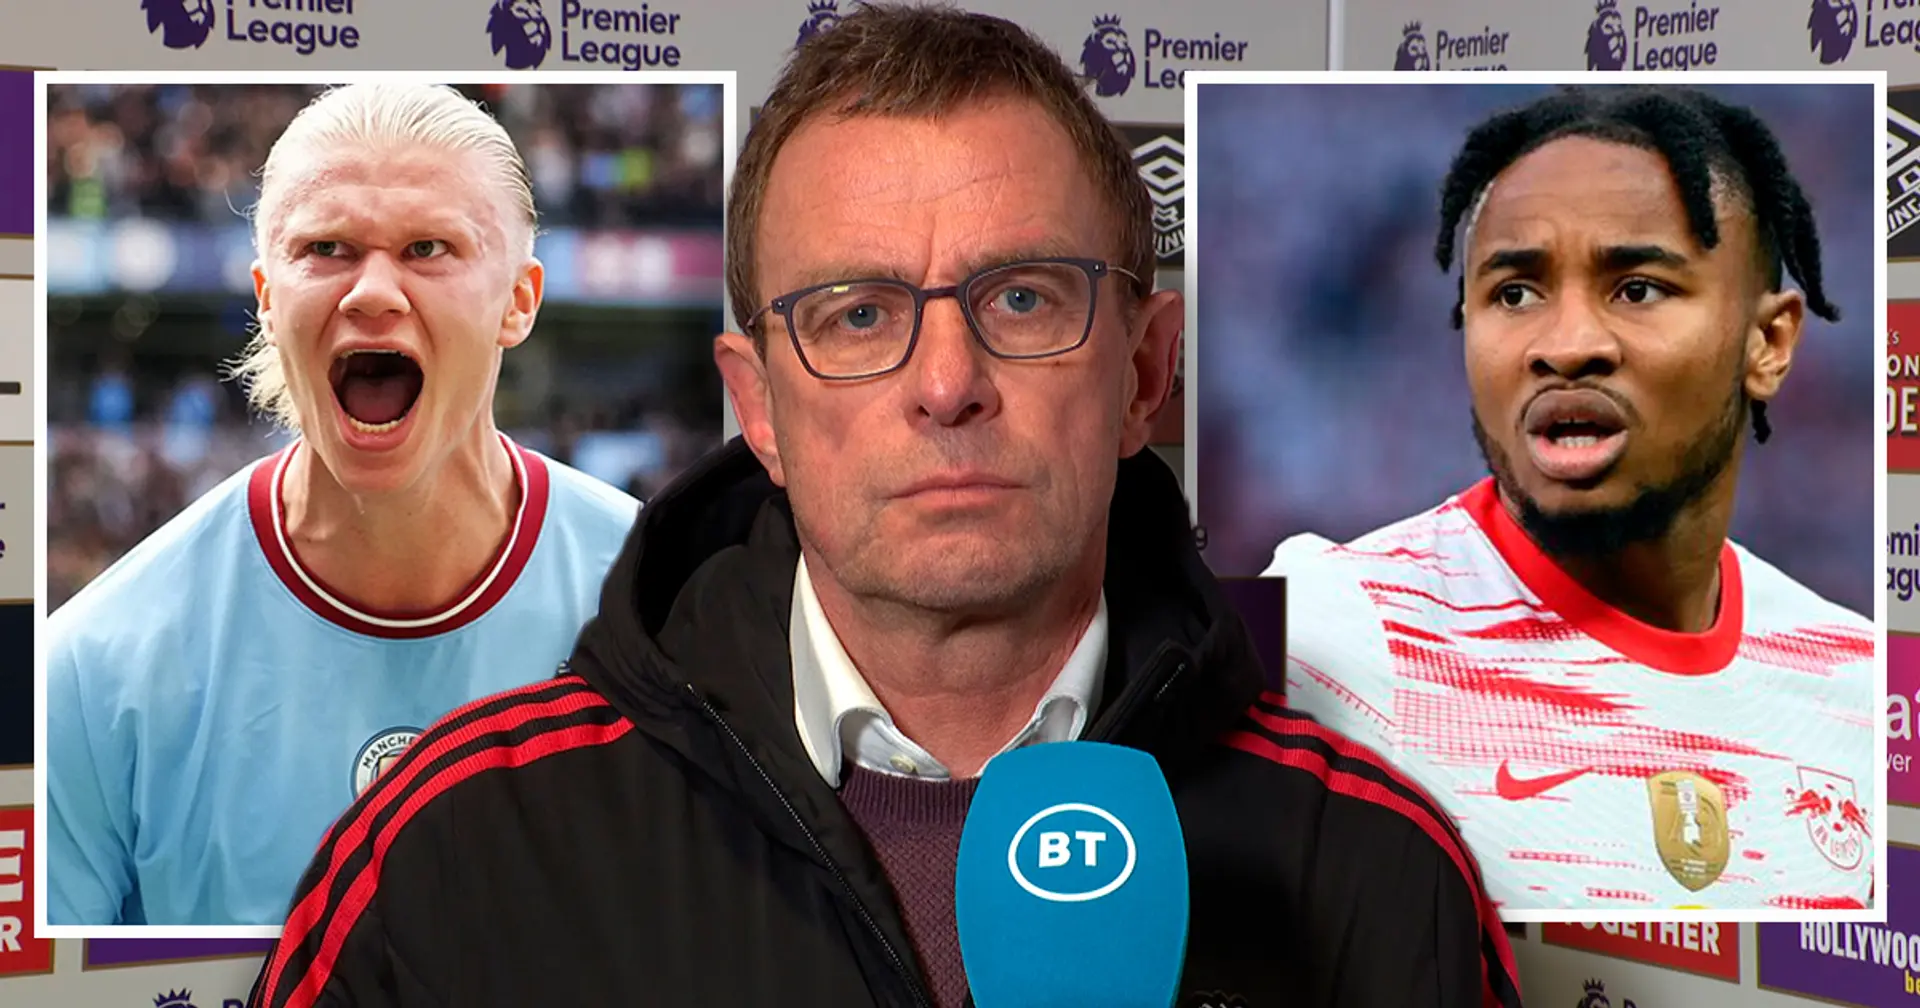 Ralf Rangnick names 6 players he advised for transfer to Man United - he wanted to build a superteam